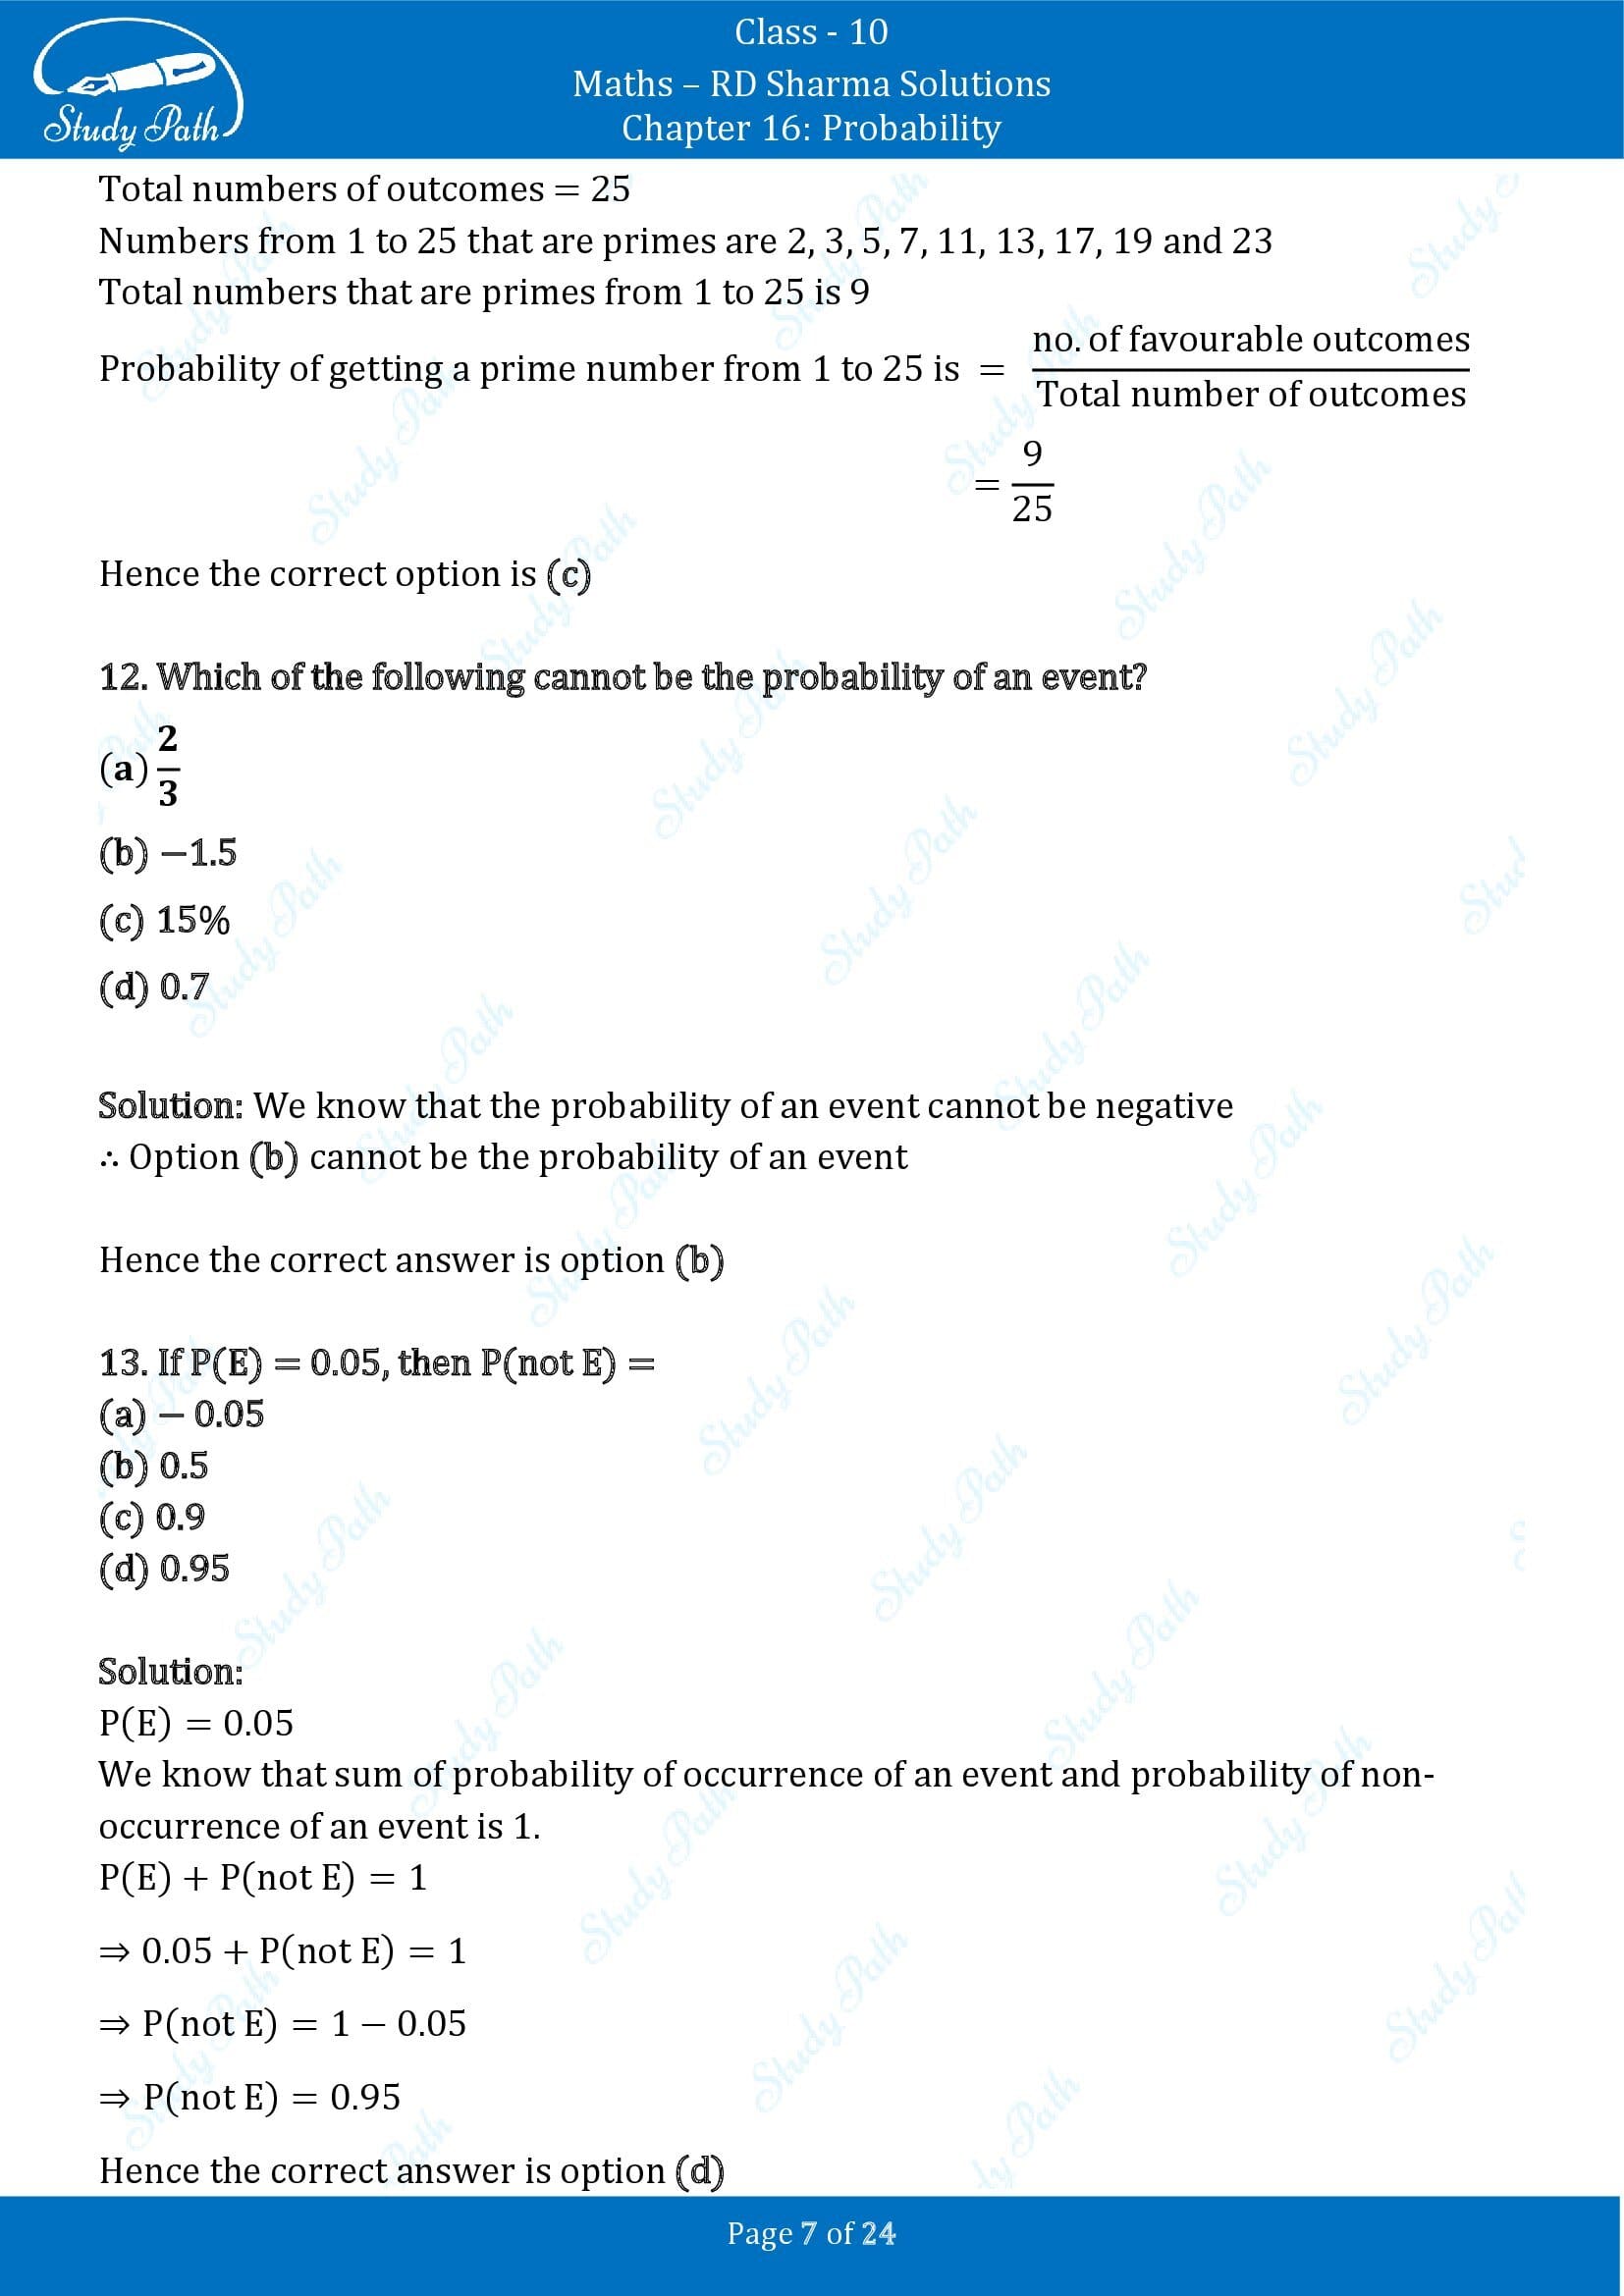 RD Sharma Solutions Class 10 Chapter 16 Probability Multiple Choice Question MCQs 00007